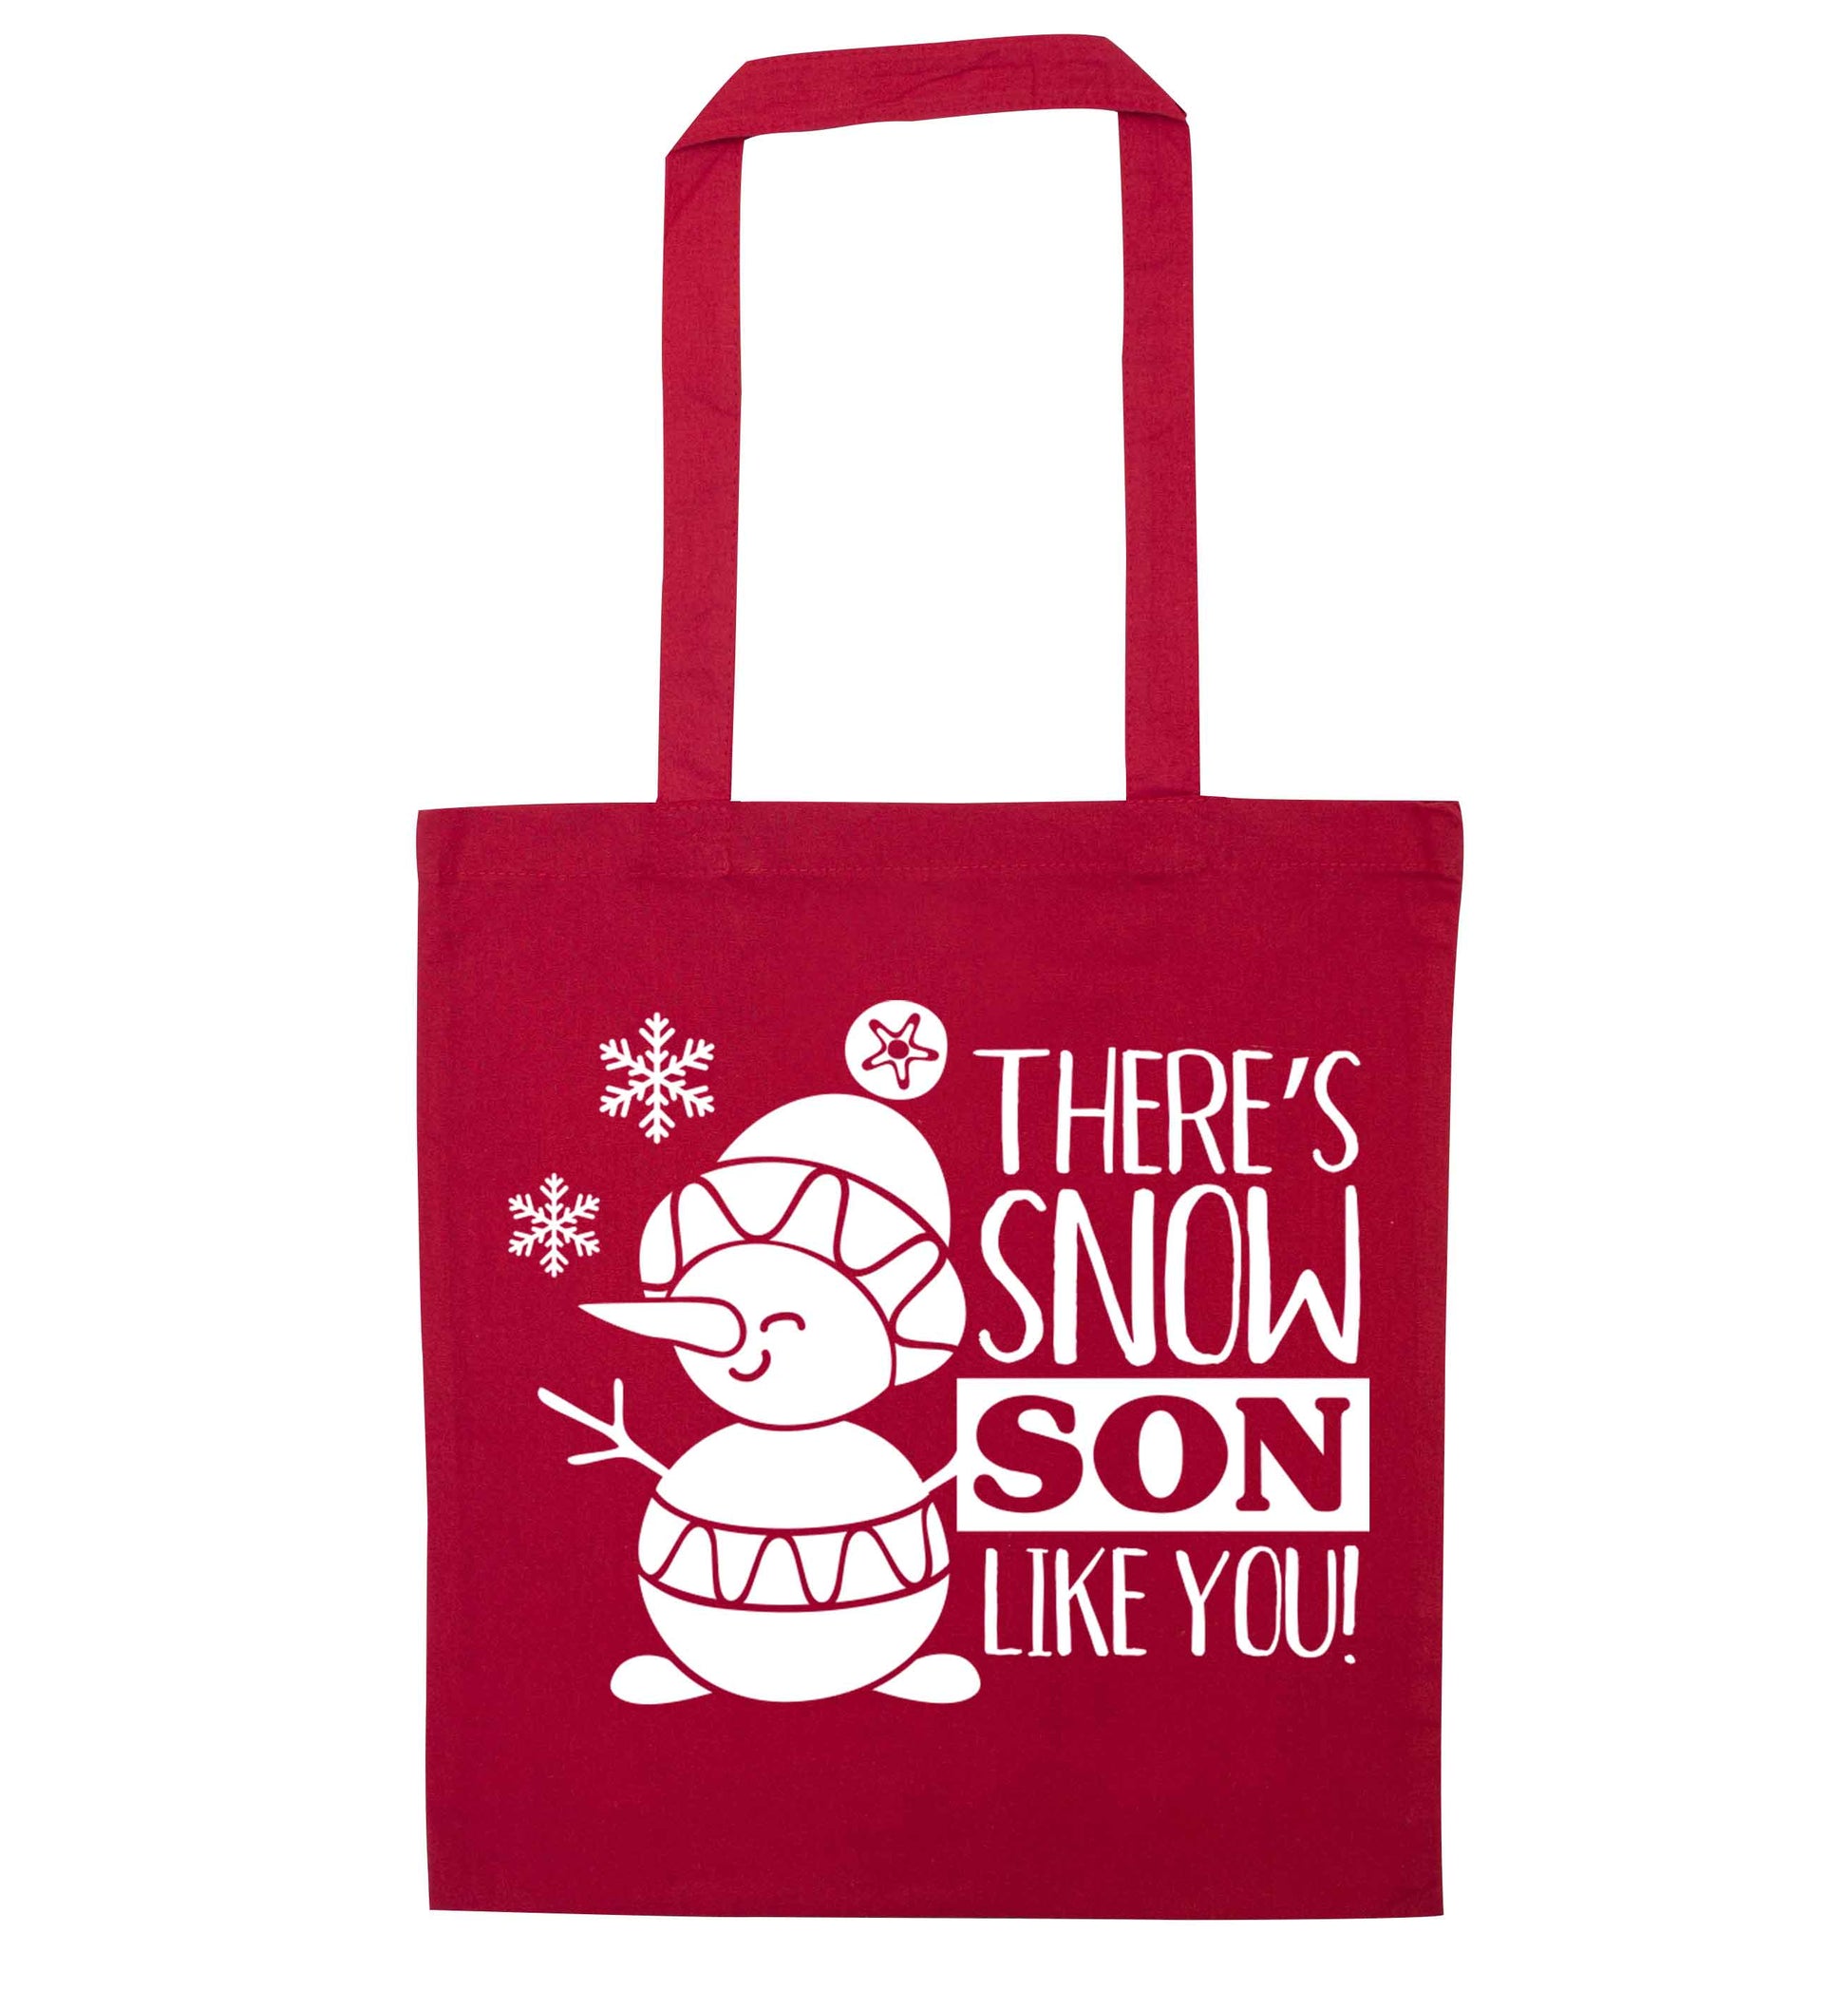 There's snow son like you red tote bag